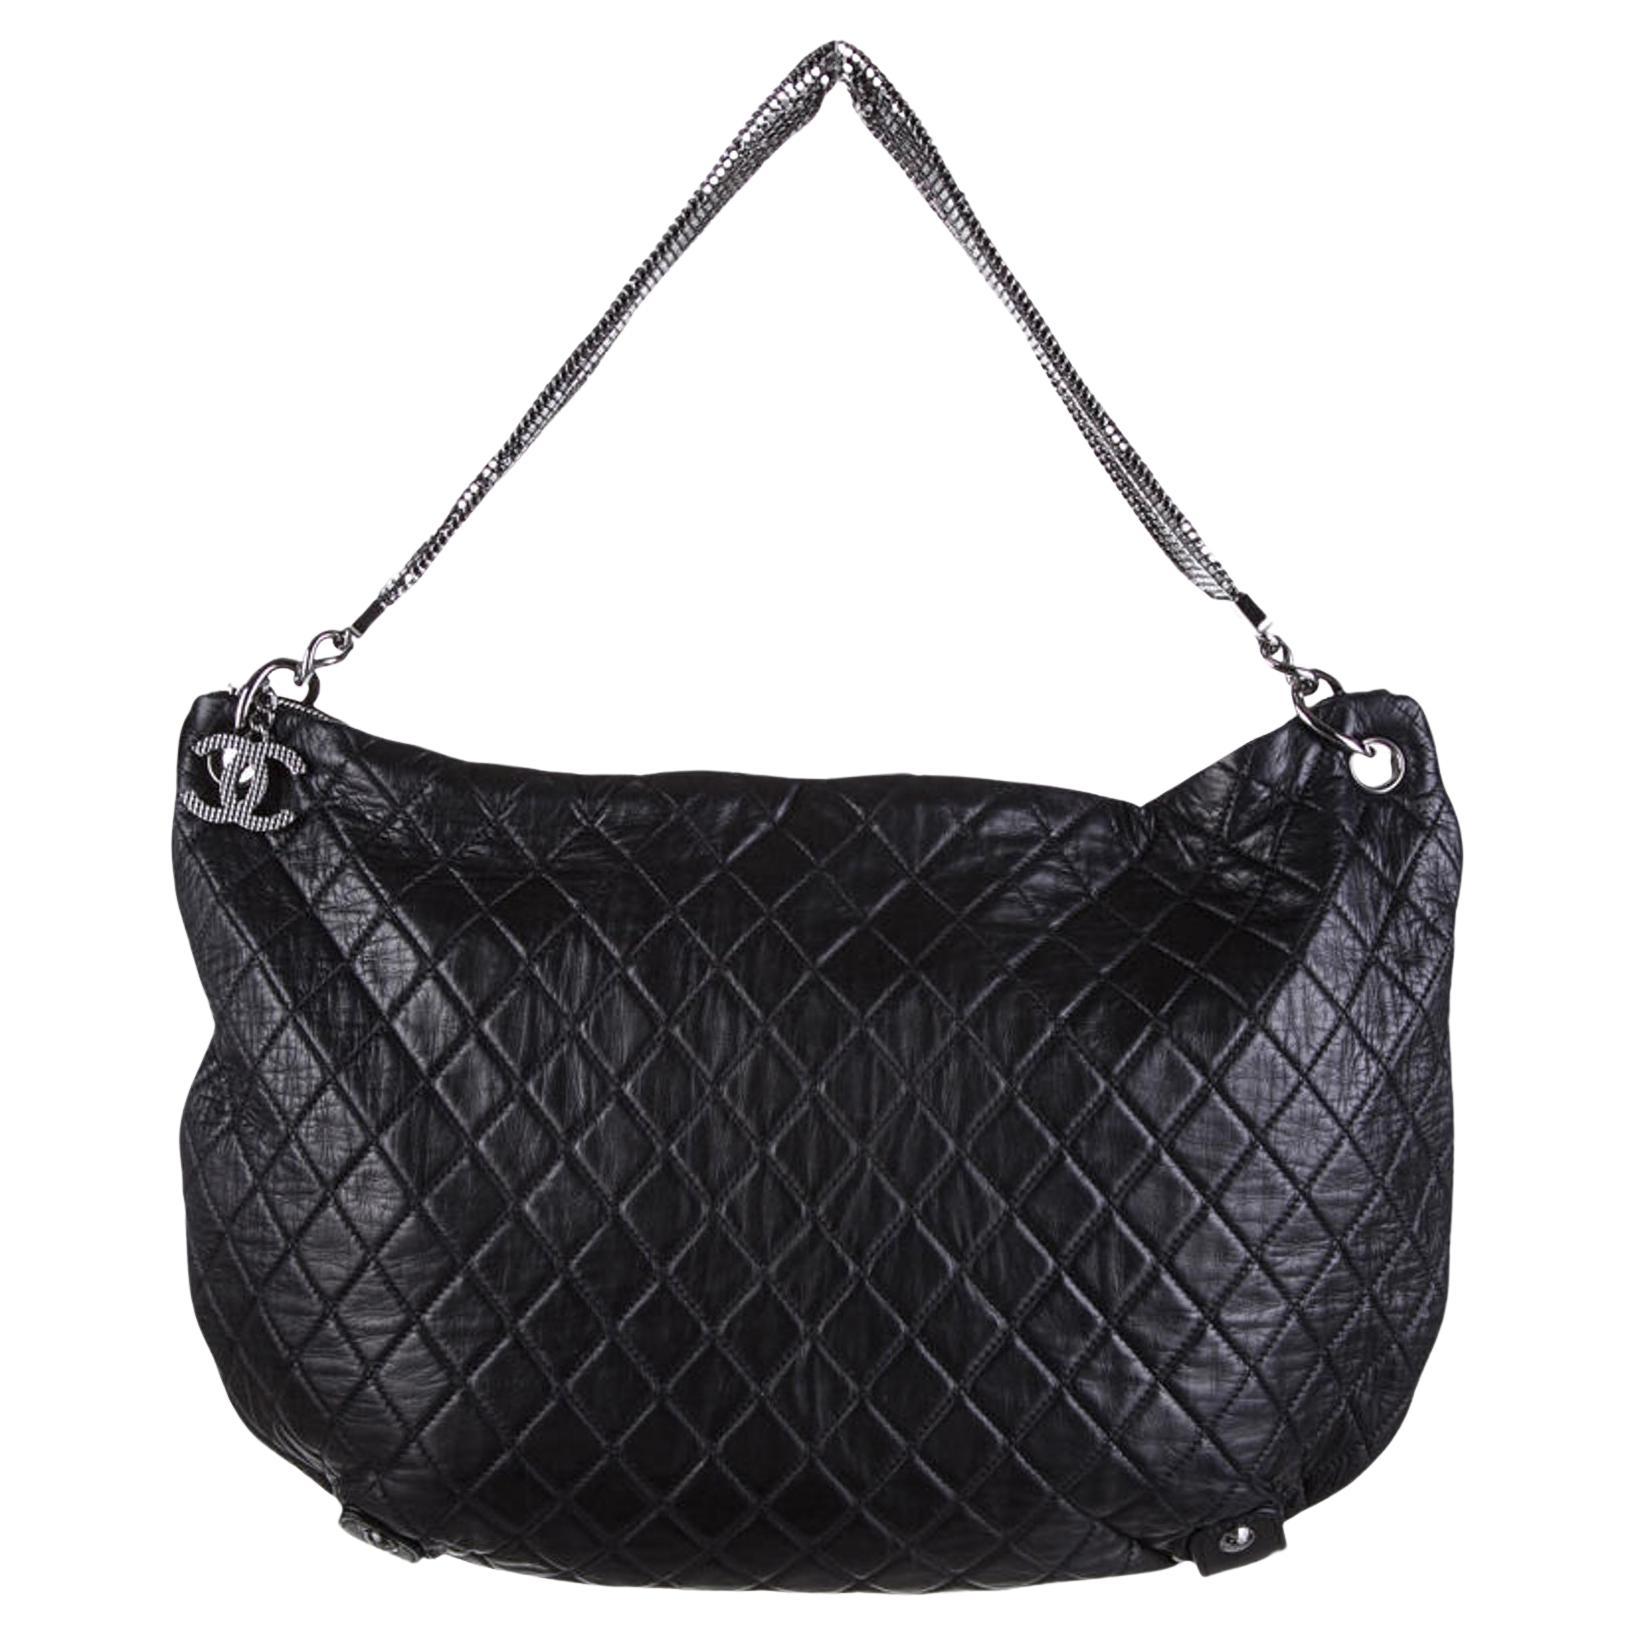 Chanel 2008 Metallic Mesh Soft Quilted Black Lambskin Leather Large Hobo Bag For Sale